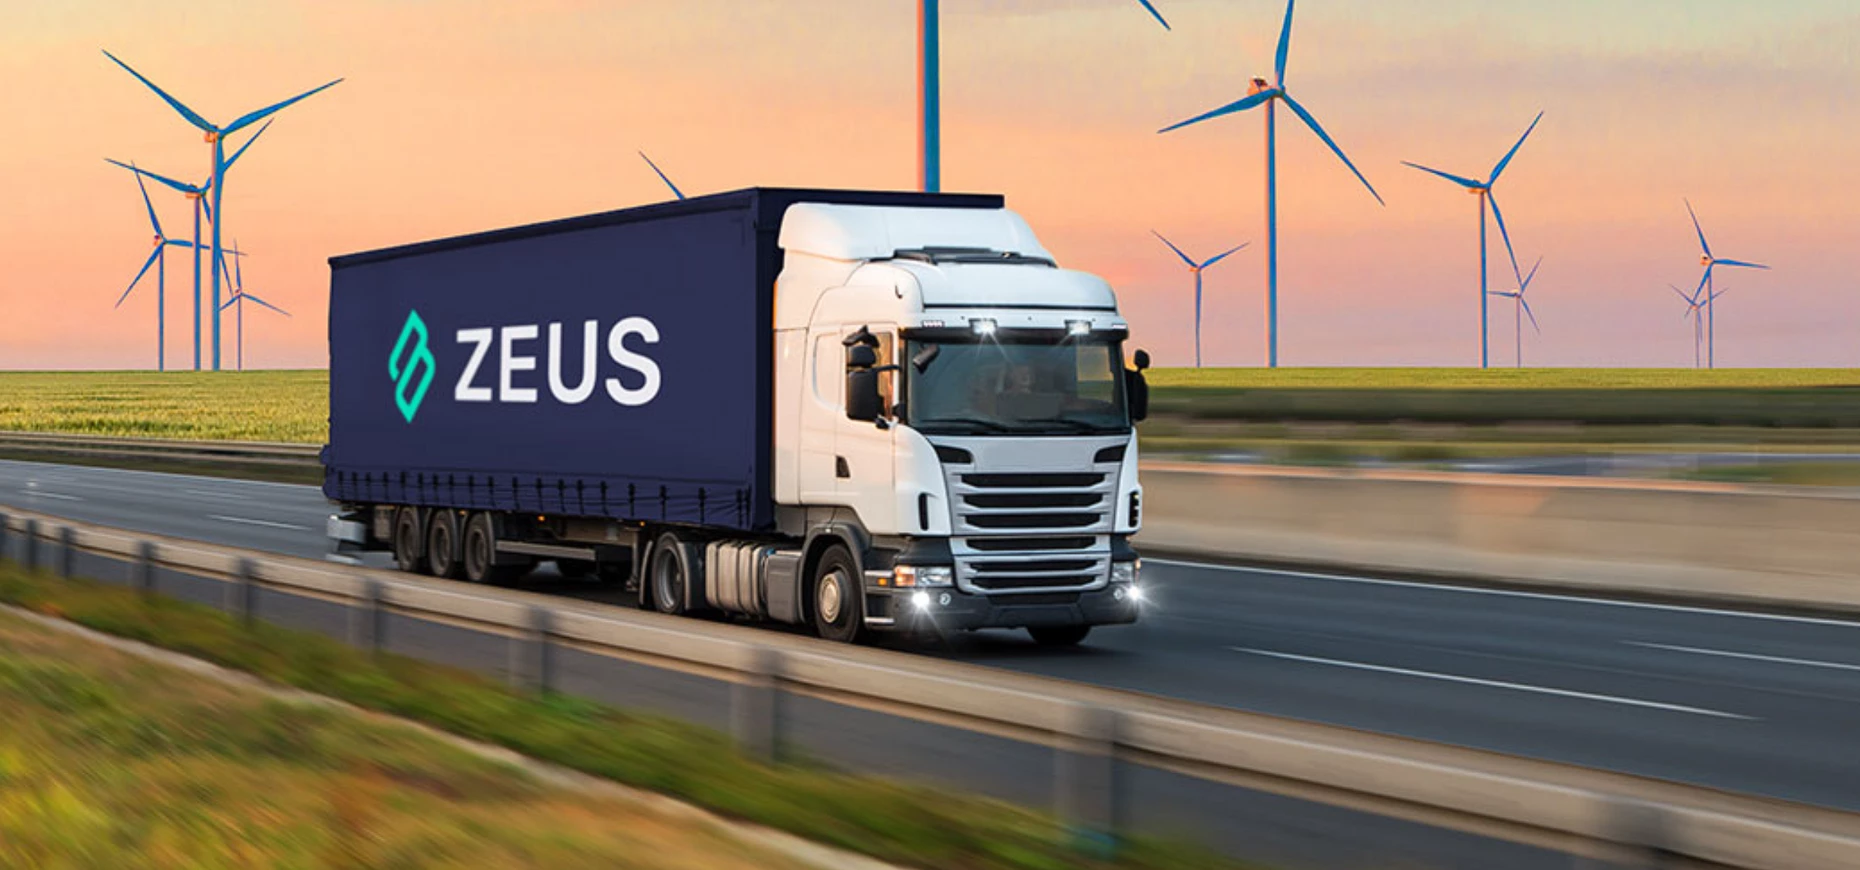 A Zeus-branded vehicle driving through a wind farm.